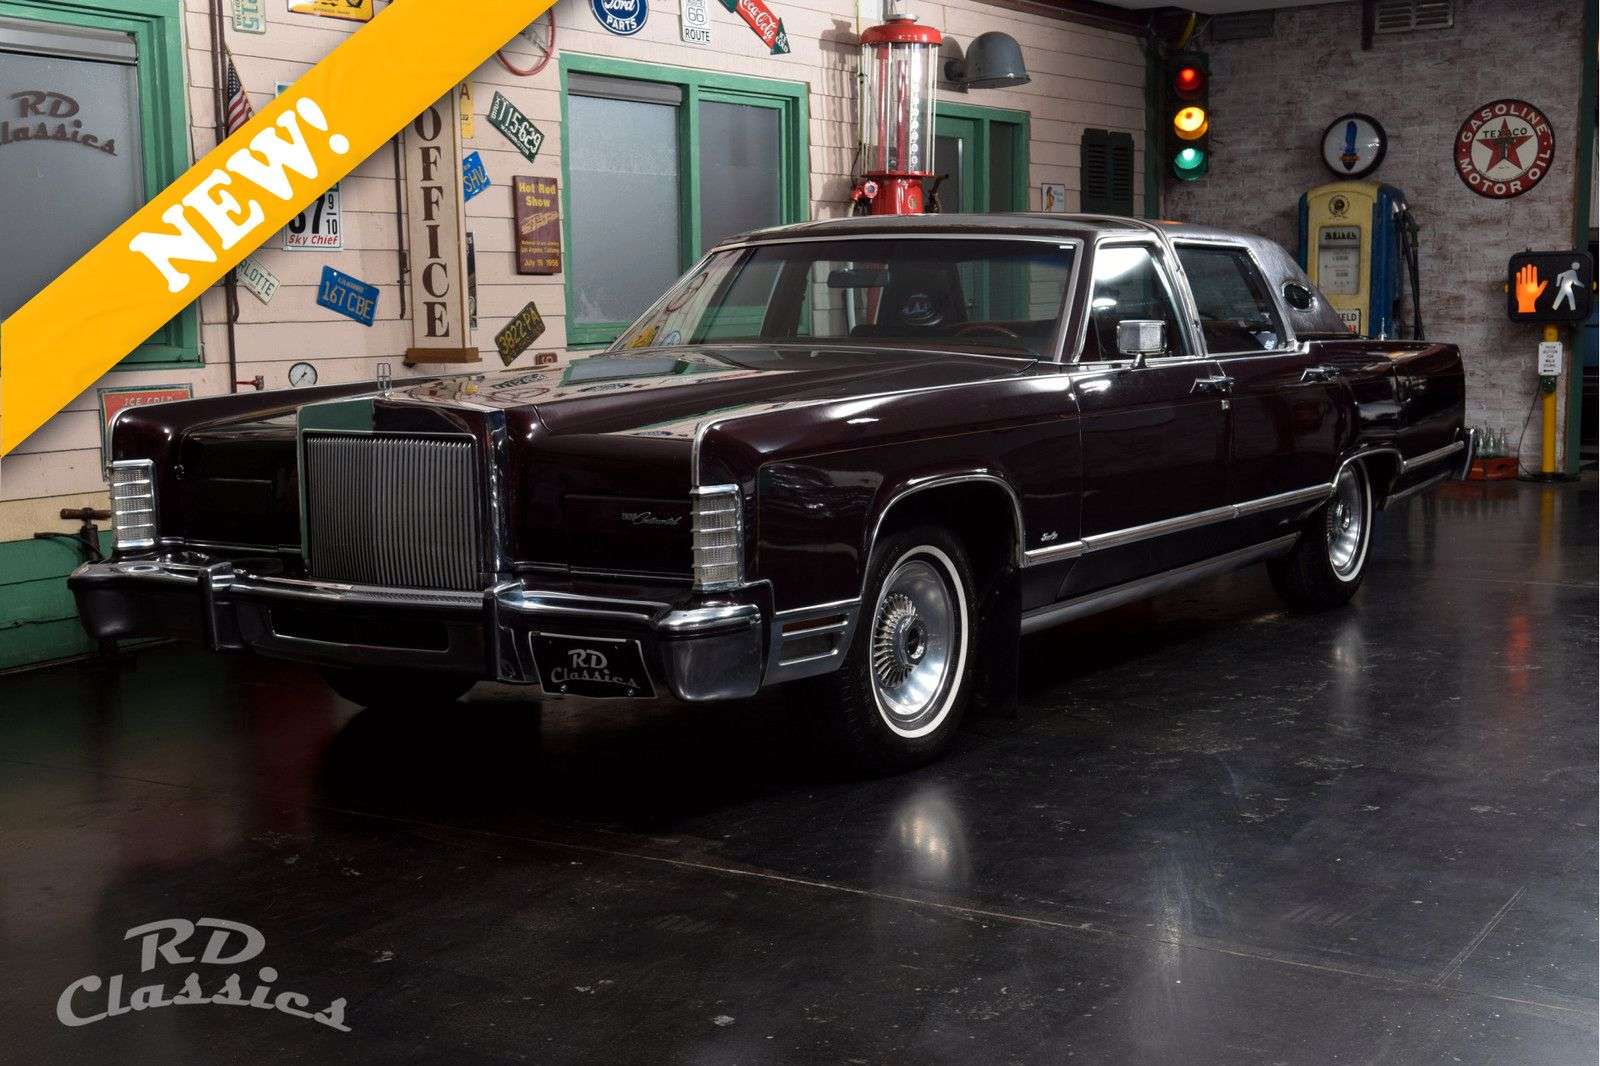 Lincoln Continental Sedan in Brown antique / classic in Emmerich for € 16,950.-